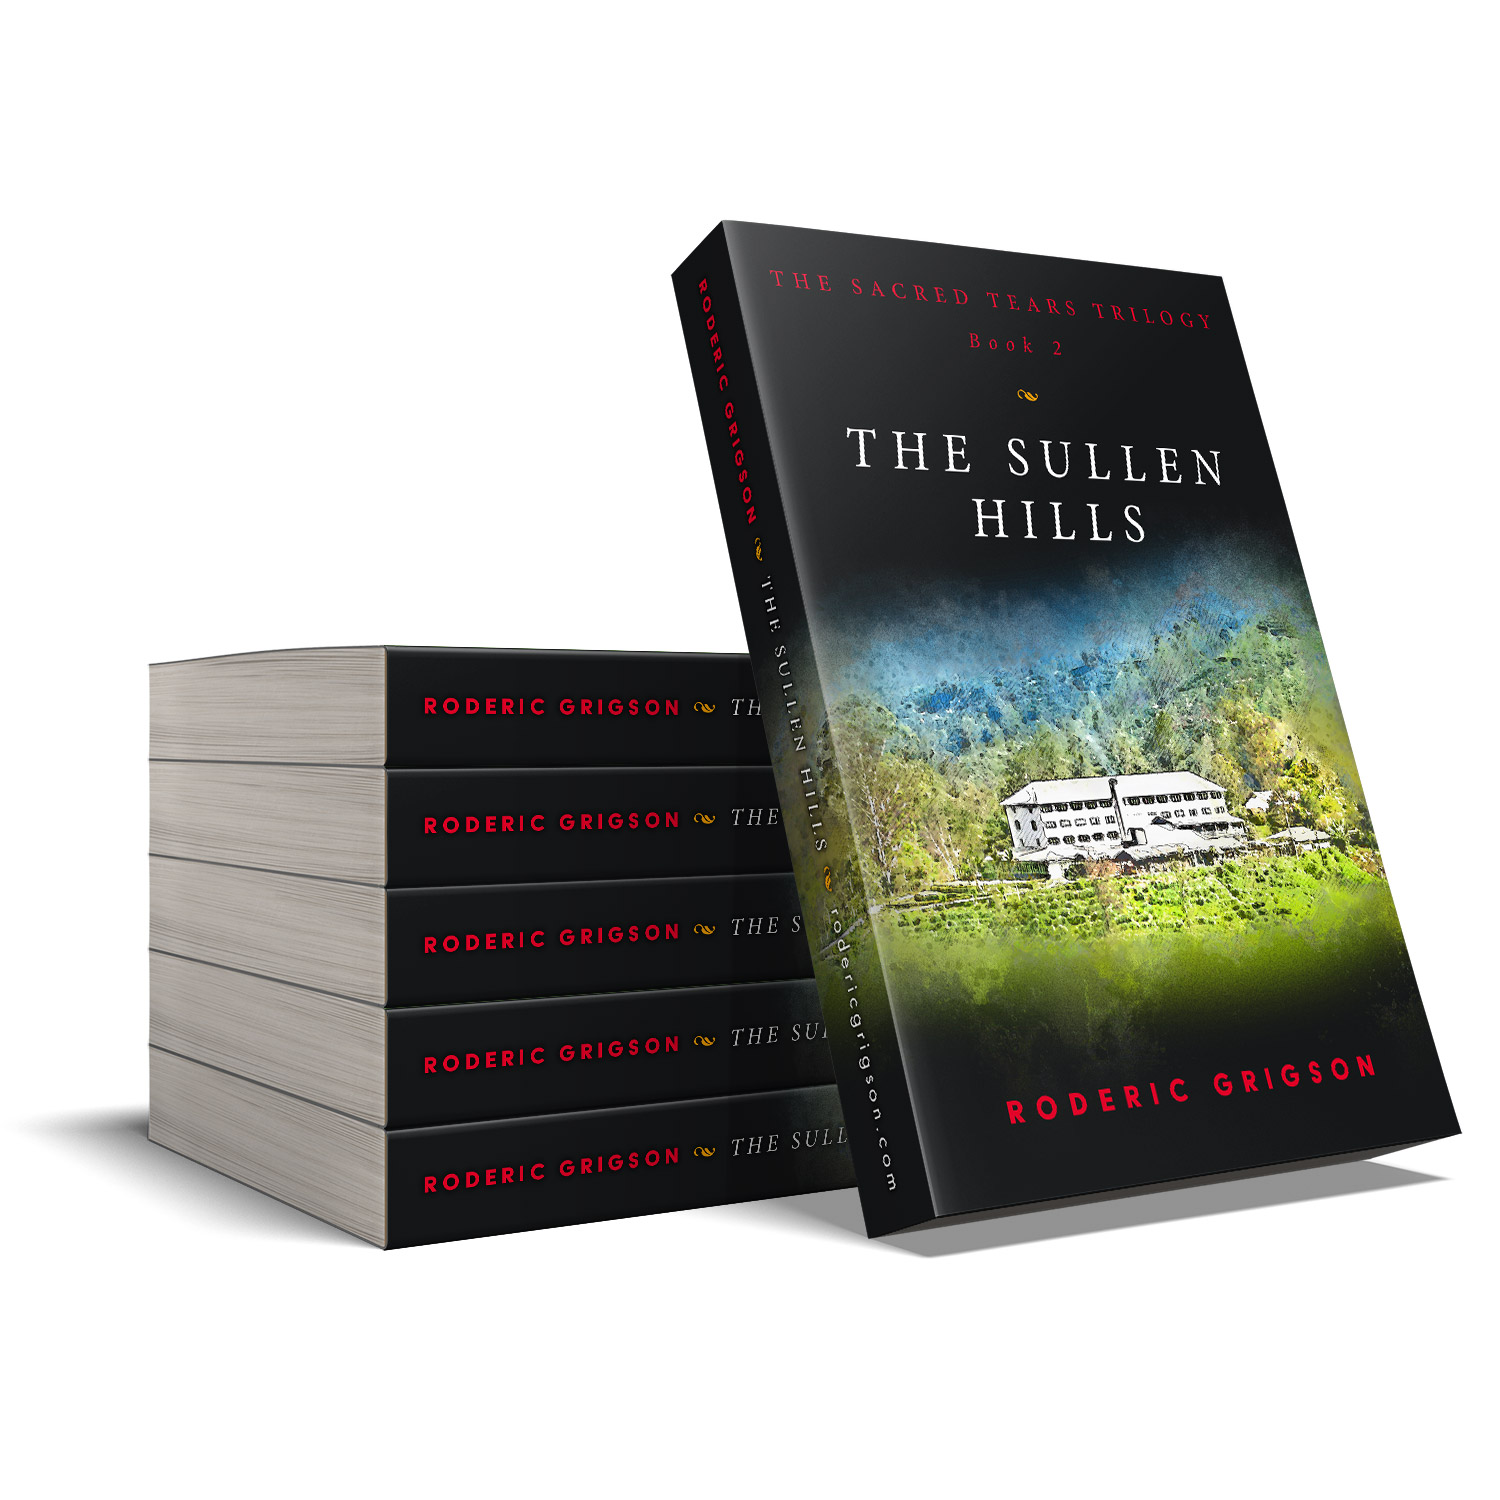 'The Sullen Hills' is the second part in a dramatic trilogy by Roderic Grigson, set during the recent Sri Lankan Civil War. The book cover and interior were designed by Mark Thomas, of coverness.com. To find out more about my book design services, please visit www.coverness.com.